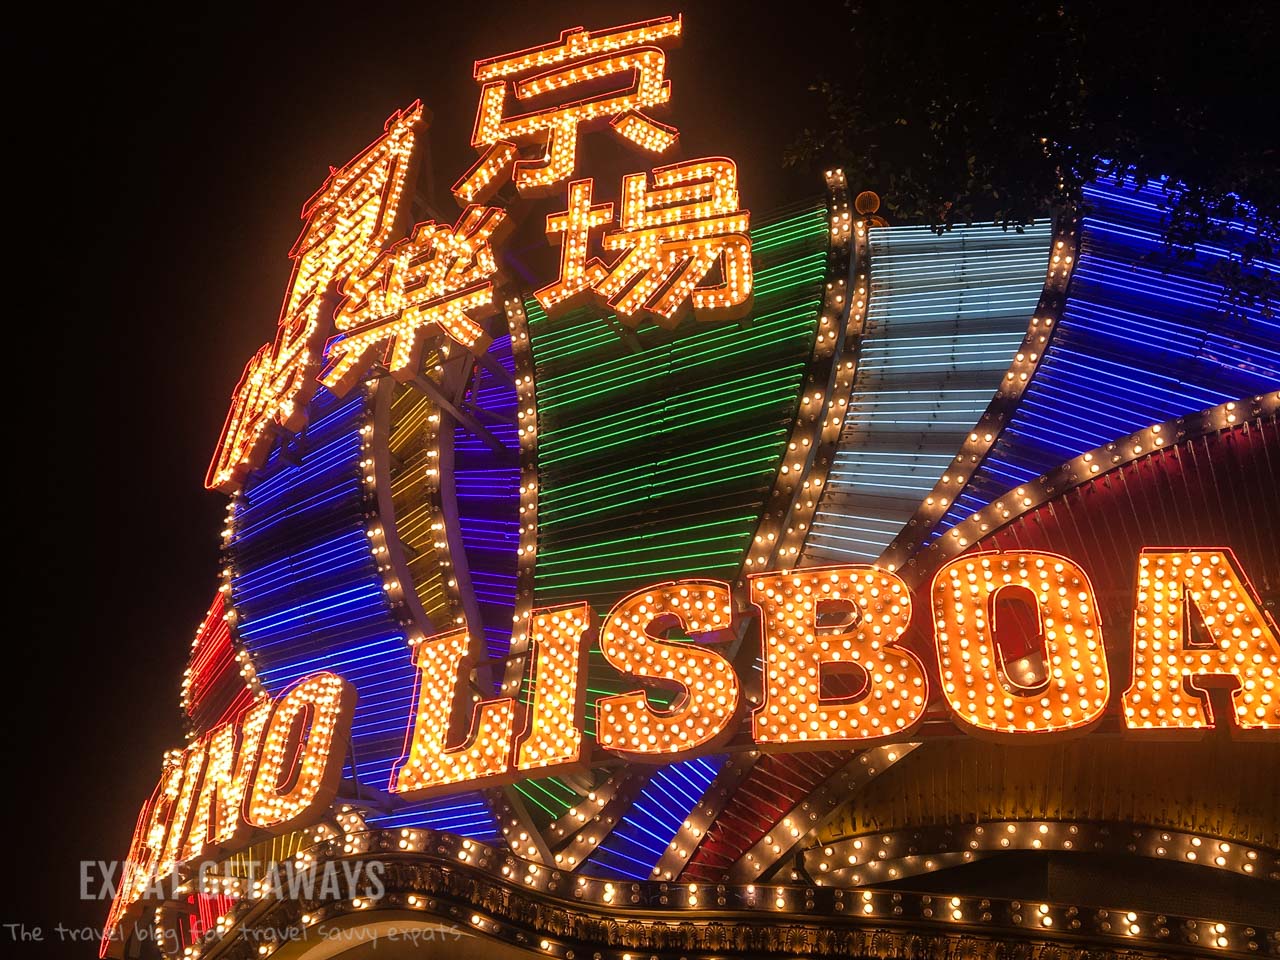 Macau is full of casinos like the original Casino Lisboa. It is possible to visit Macau to explore its rich history. 